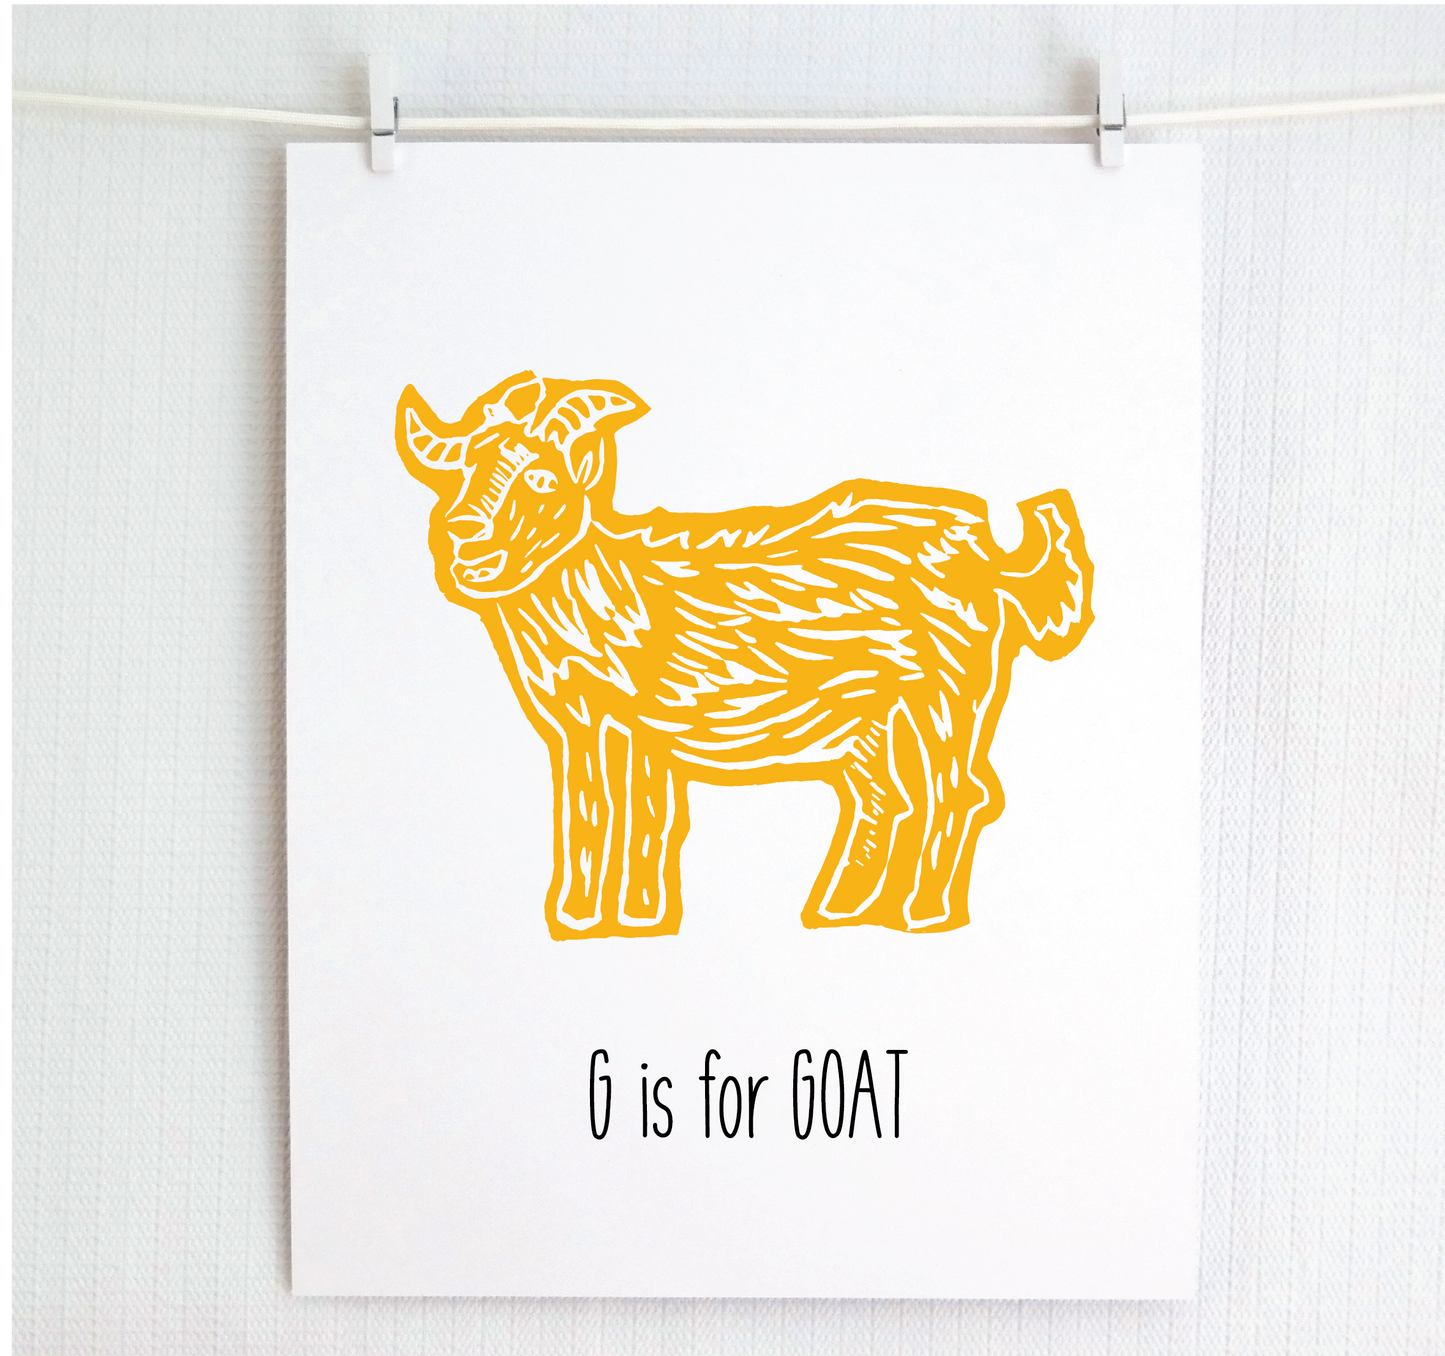 G is for Goat